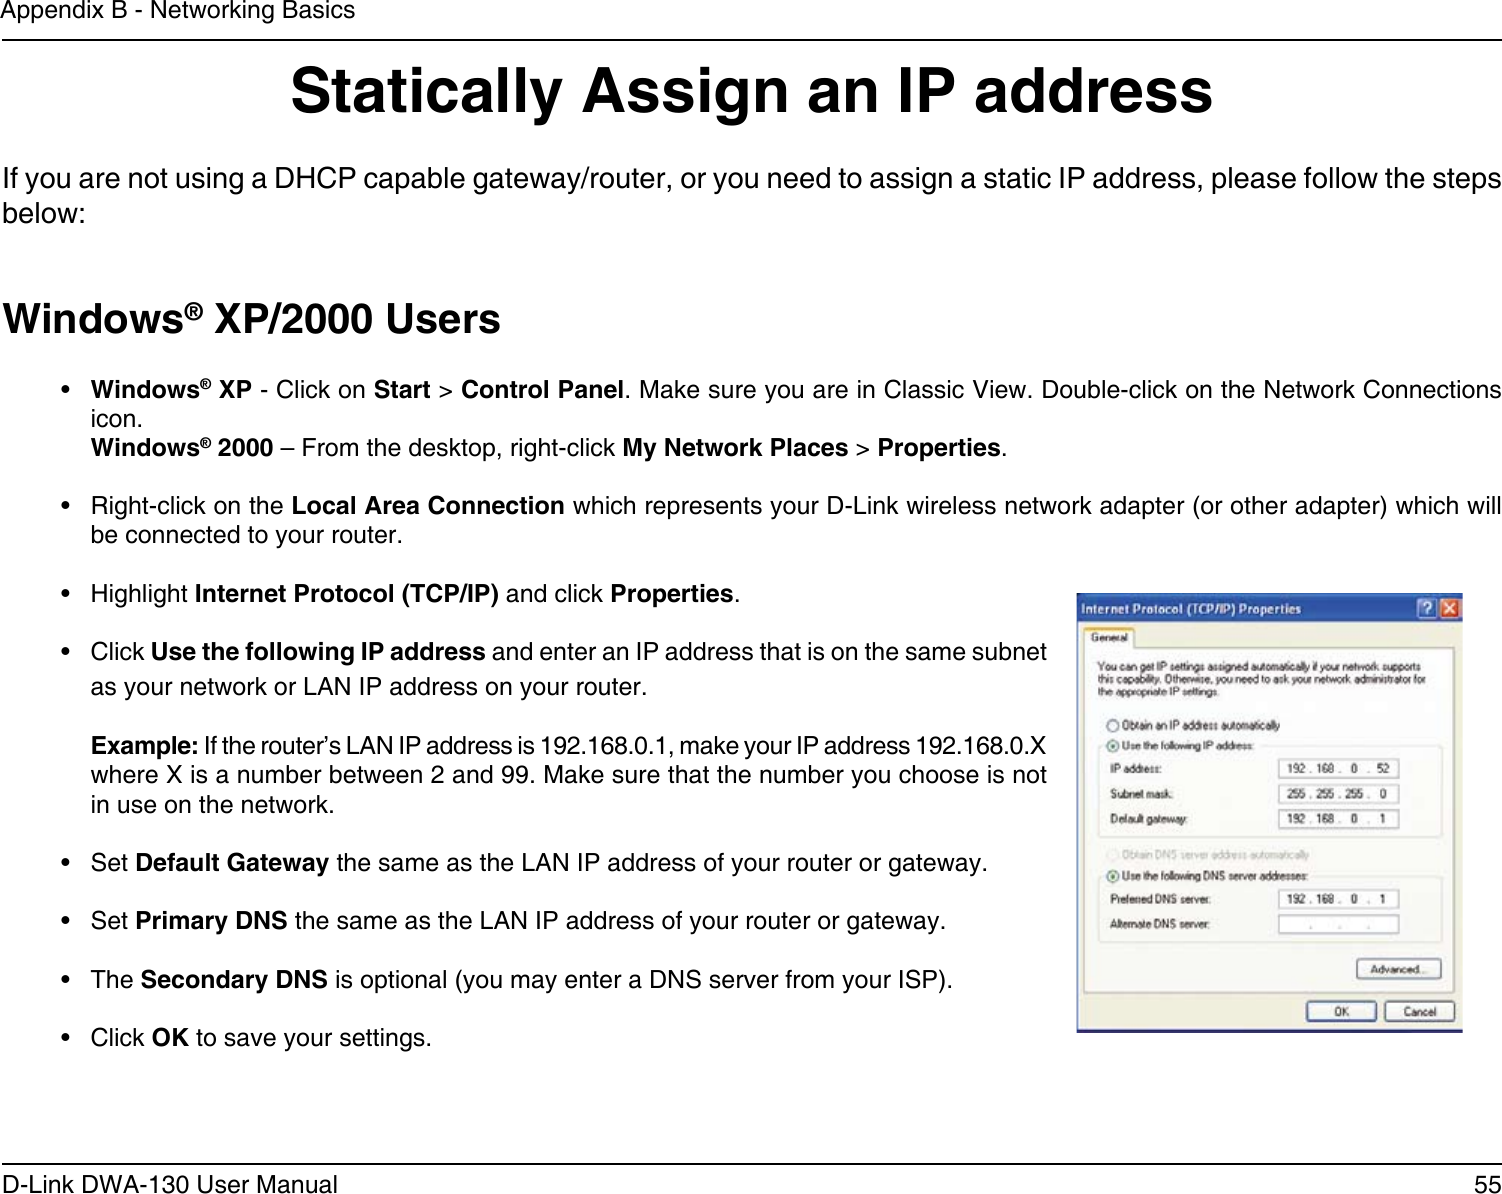 55D-Link DWA-130 User ManualAppendix B - Networking BasicsStatically Assign an IP addressIf you are not using a DHCP capable gateway/router, or you need to assign a static IP address, please follow the steps below:Windows® XP/2000 Users•  Windows® XP - Click on Start &gt; Control Panel. Make sure you are in Classic View. Double-click on the Network Connections icon. Windows® 2000 – From the desktop, right-click My Network Places &gt; Properties.•  Right-click on the Local Area Connection which represents your D-Link wireless network adapter (or other adapter) which will be connected to your router.•  Highlight Internet Protocol (TCP/IP) and click Properties.•  Click Use the following IP address and enter an IP address that is on the same subnet as your network or LAN IP address on your router. Example: If the router’s LAN IP address is 192.168.0.1, make your IP address 192.168.0.X where X is a number between 2 and 99. Make sure that the number you choose is not in use on the network. •  Set Default Gateway the same as the LAN IP address of your router or gateway.•  Set Primary DNS the same as the LAN IP address of your router or gateway. •  The Secondary DNS is optional (you may enter a DNS server from your ISP).•  Click OK to save your settings.